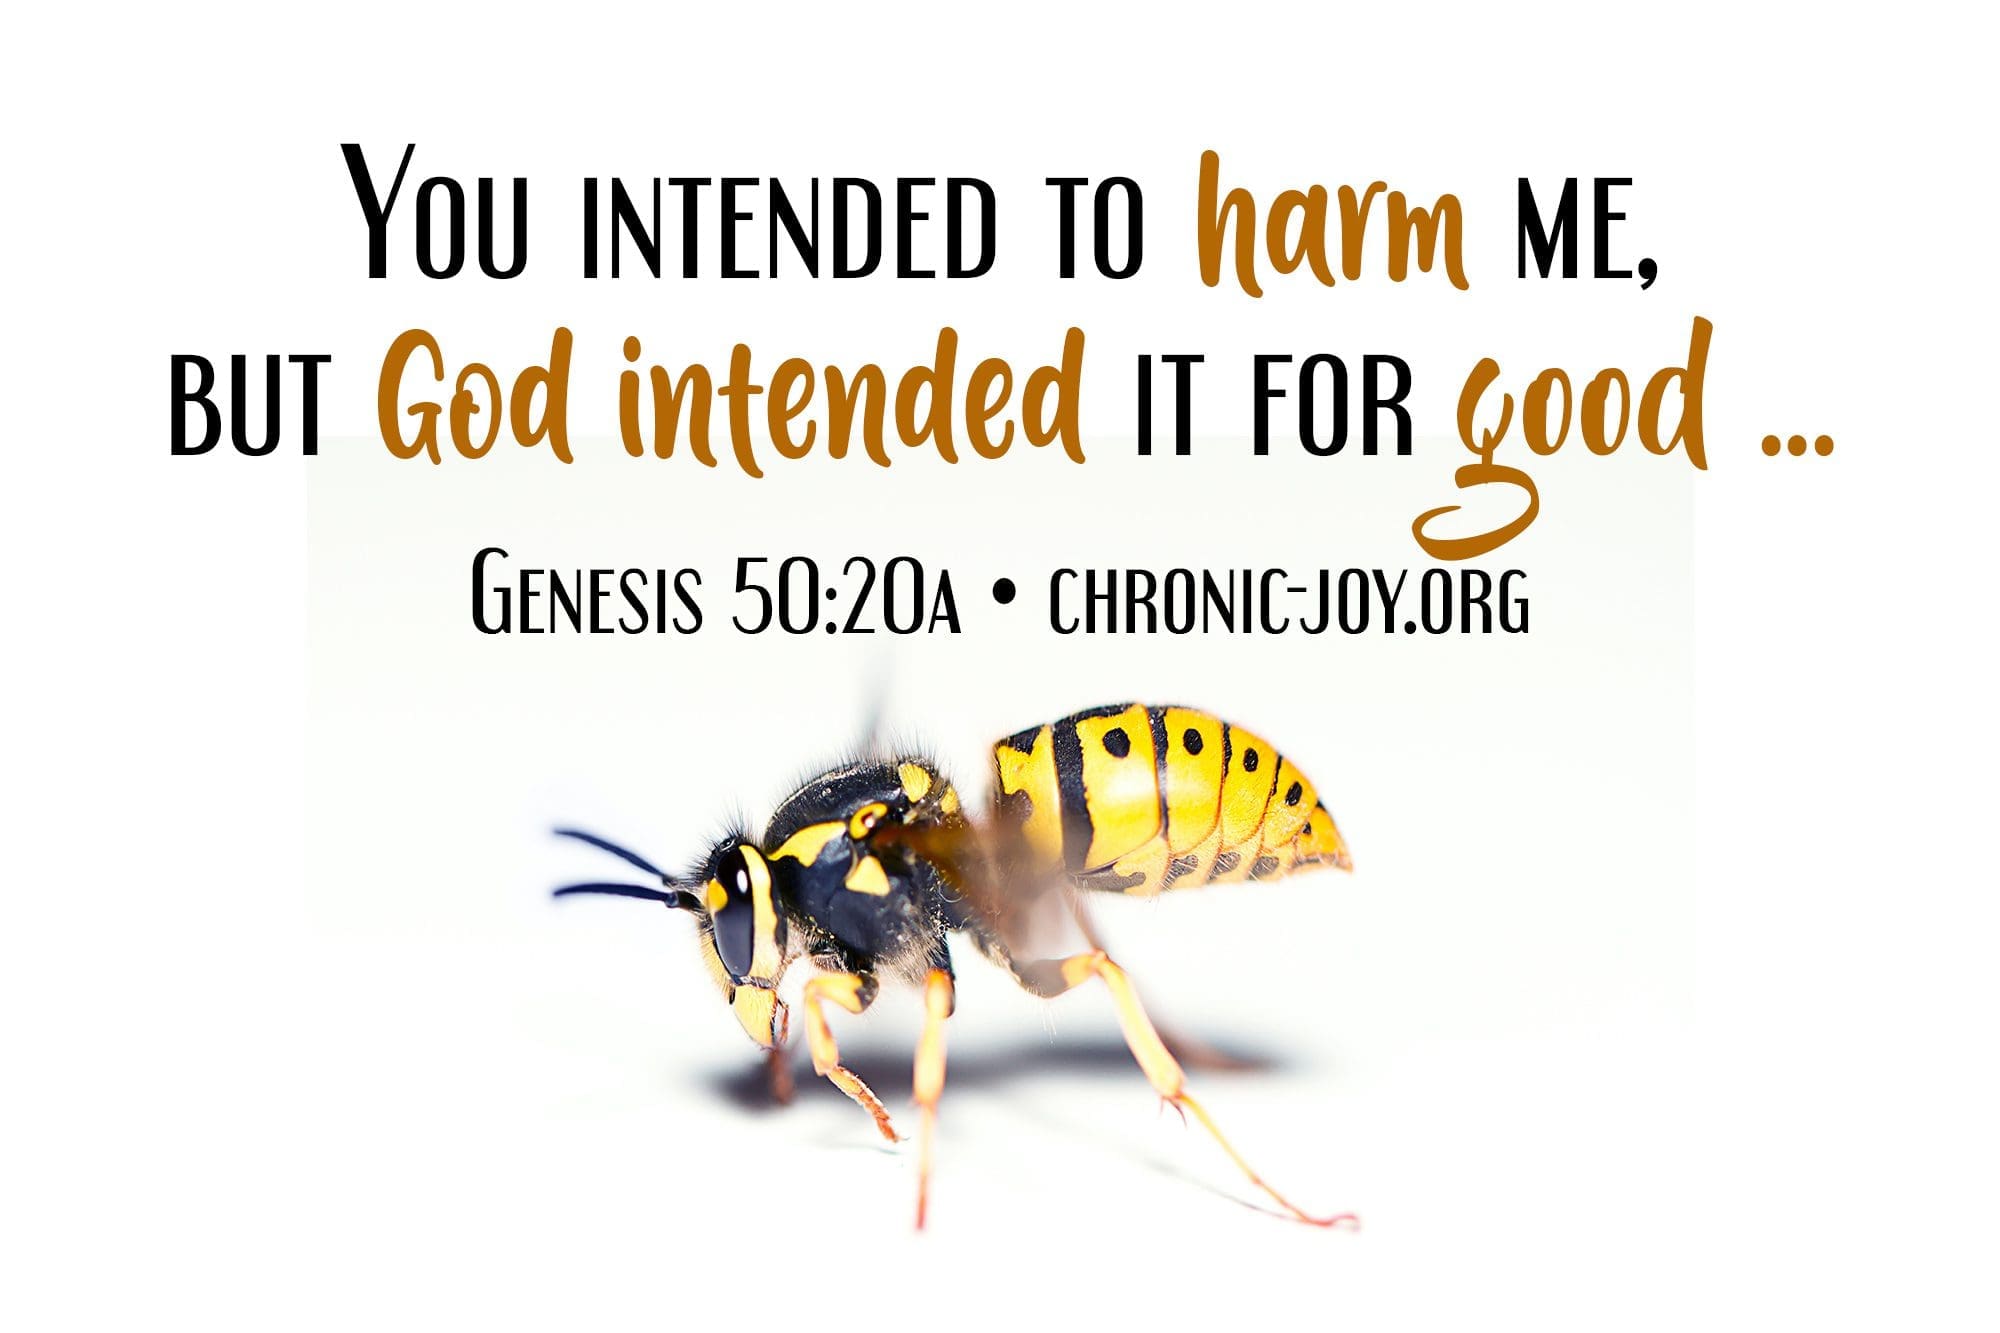 "You intended to harm me, but God intended it for good..." Genesis 50:20a